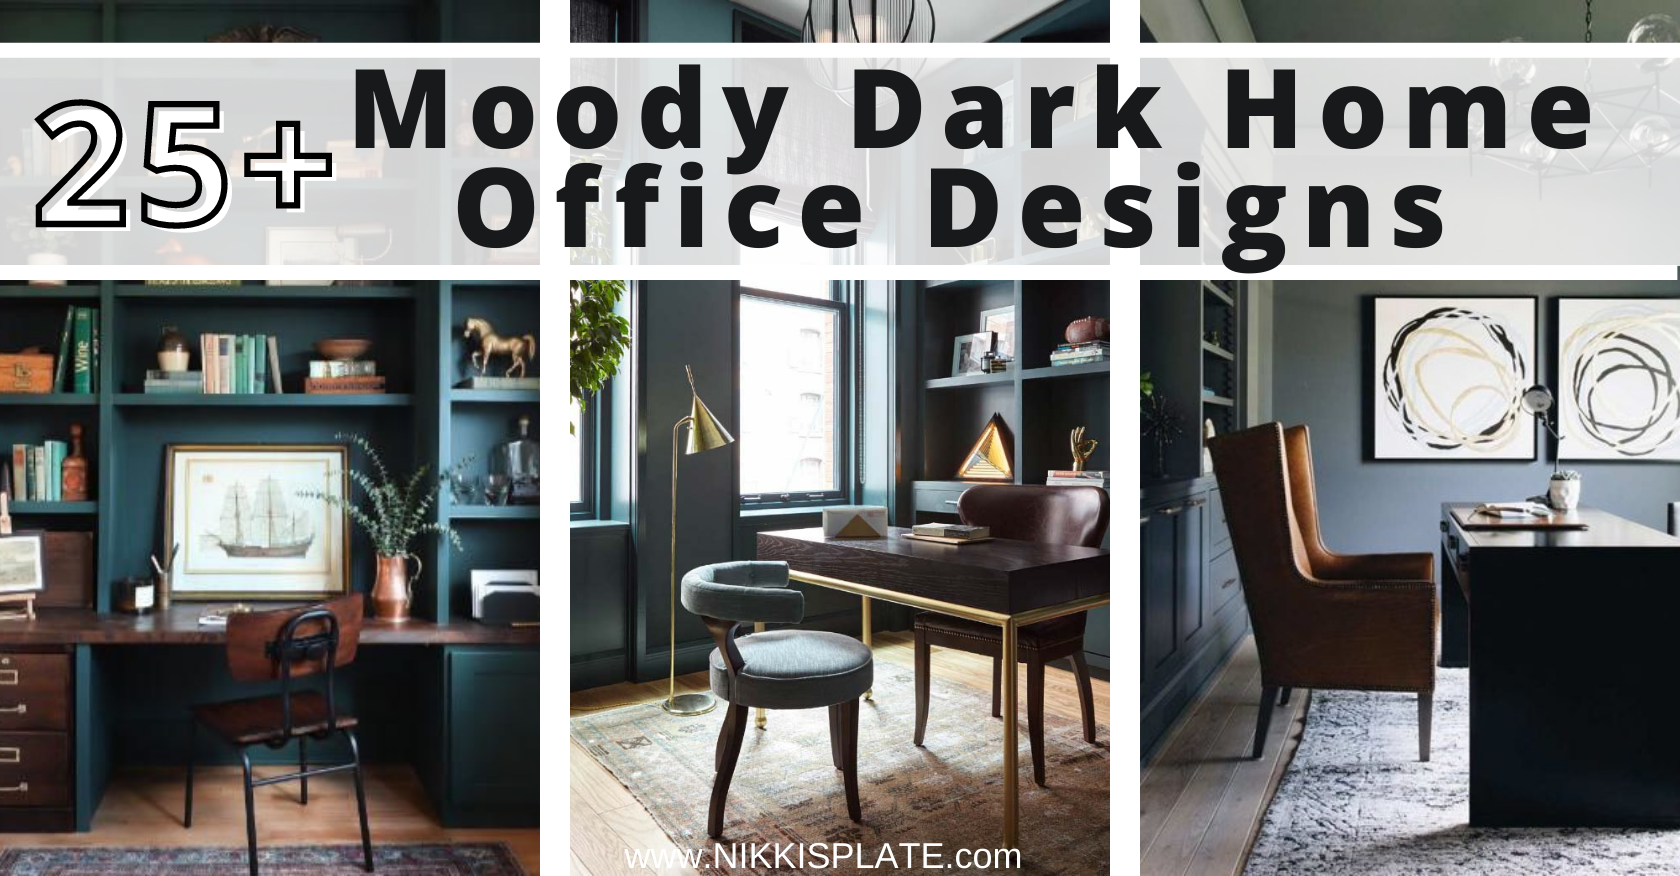 How to Design a Cozy Farmhouse Style Office Space